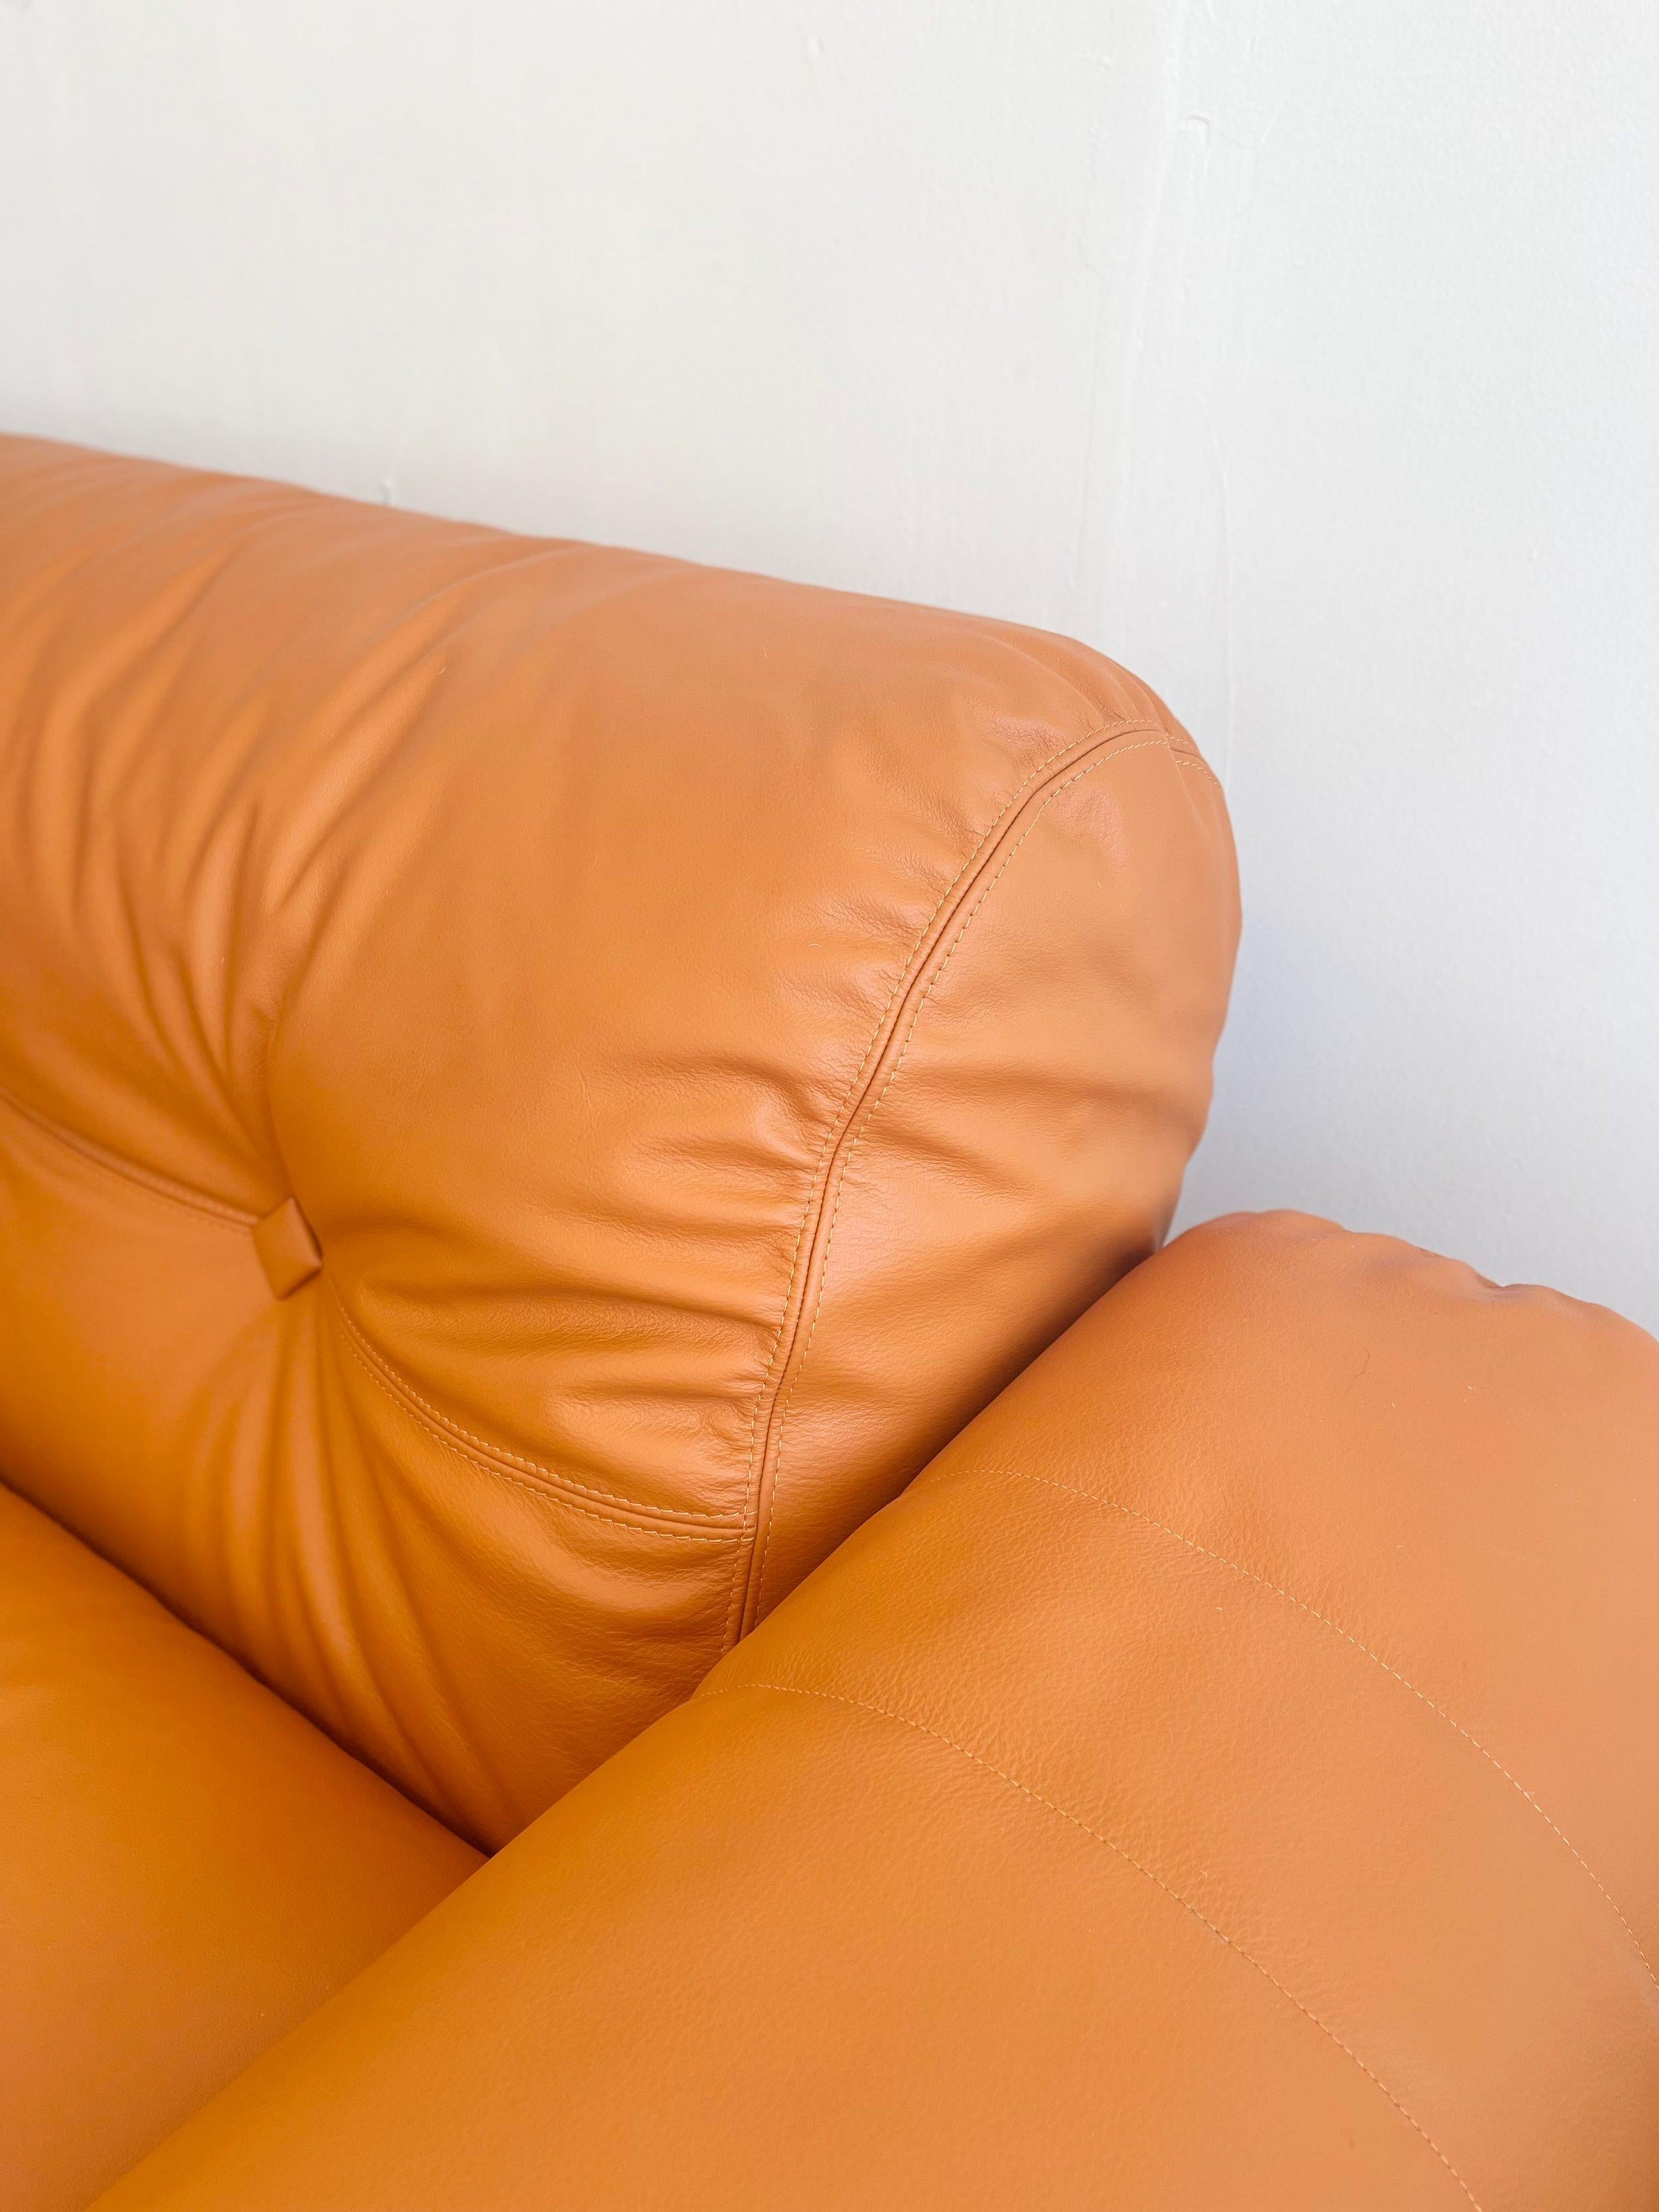 Adriano Piazzesi 1970s Sofa Newly Upholstered with Copper Brown Italian Leather For Sale 5